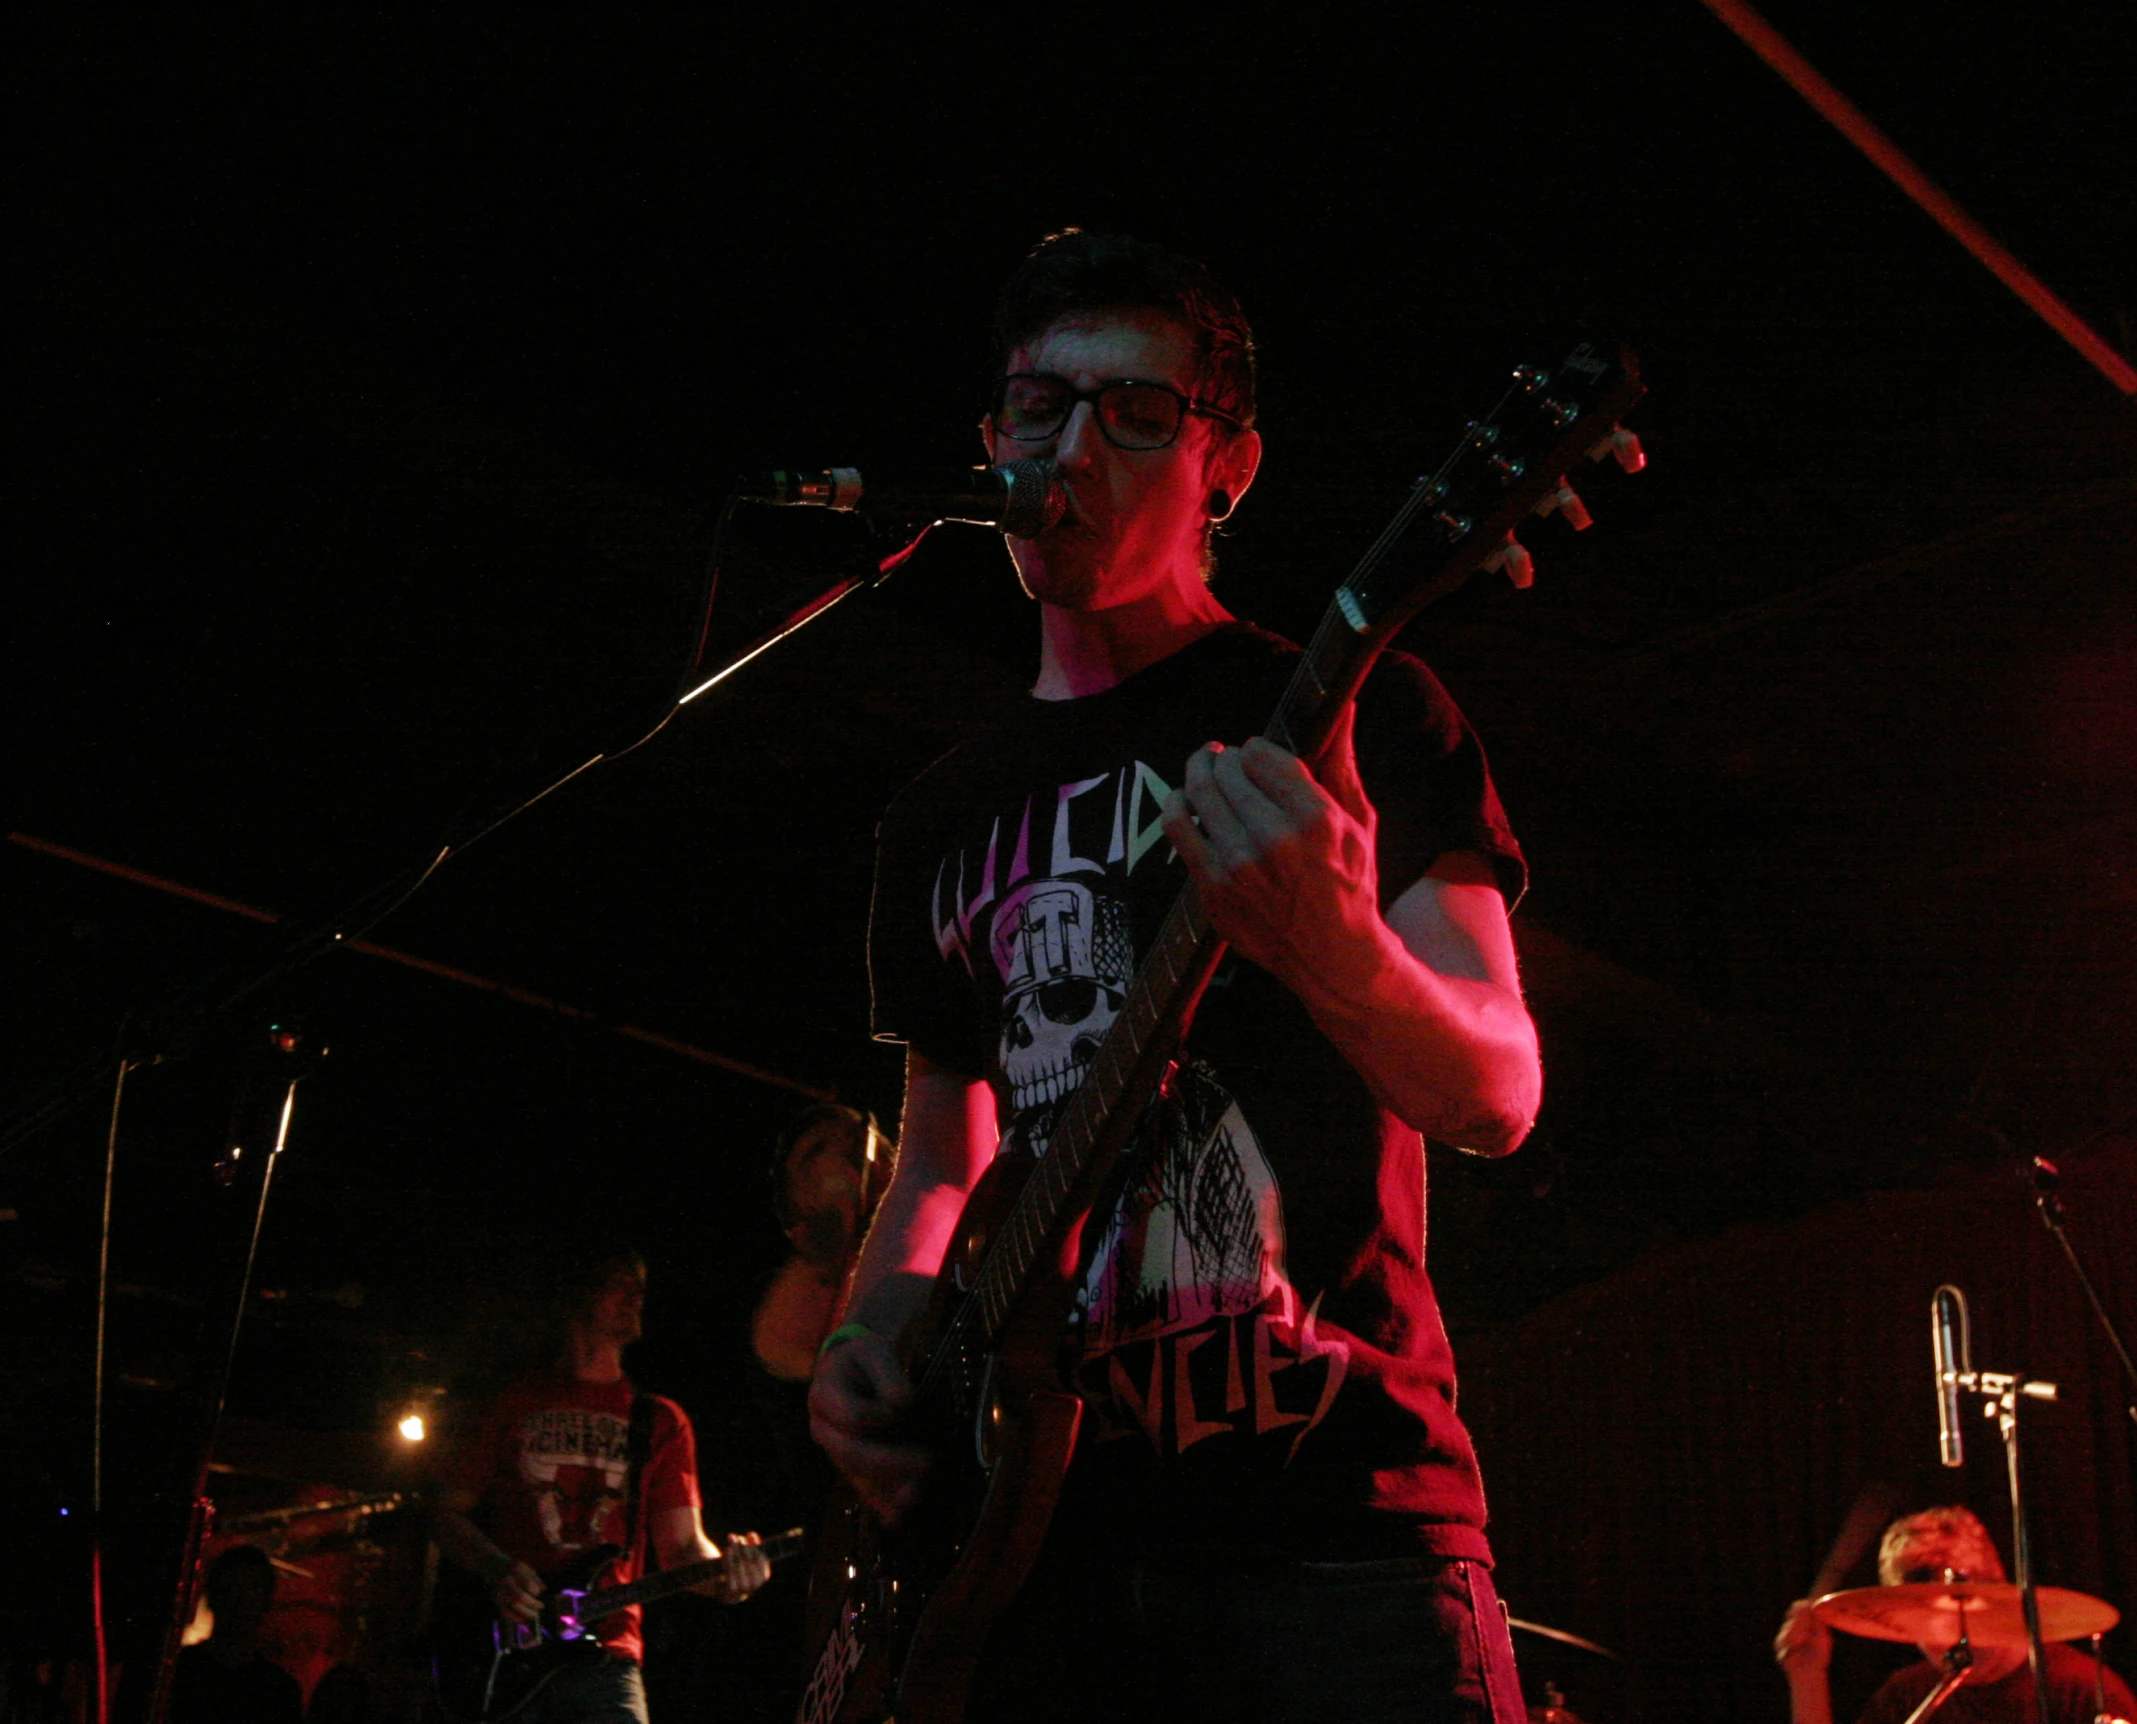 young musician performing on stage in dark